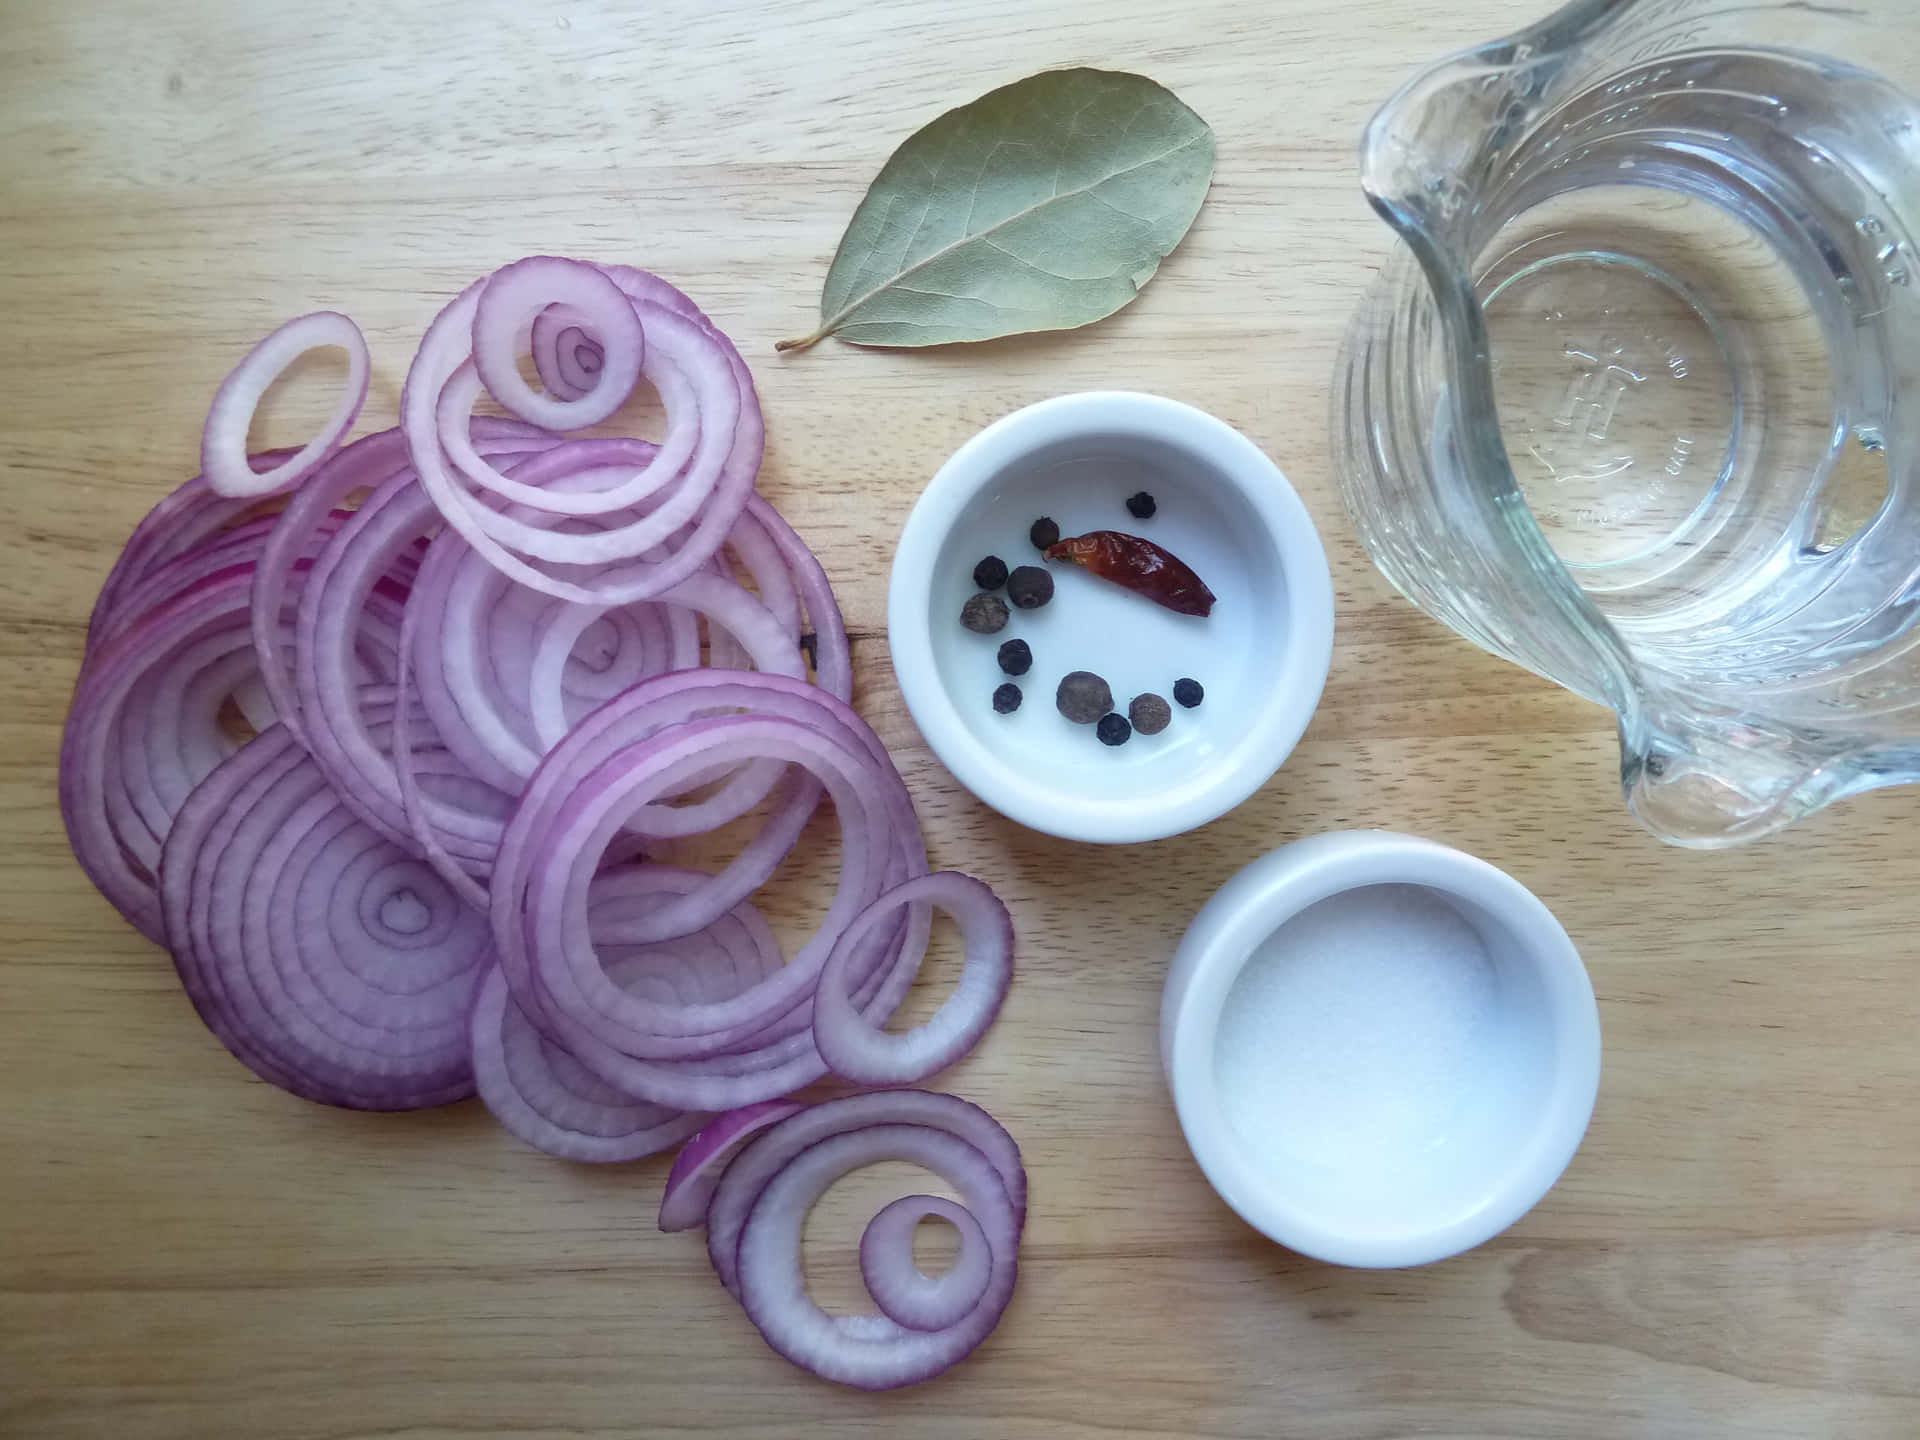 A Fresh Bunch of Purple Onions as Part of a Healthy Meal Wallpaper